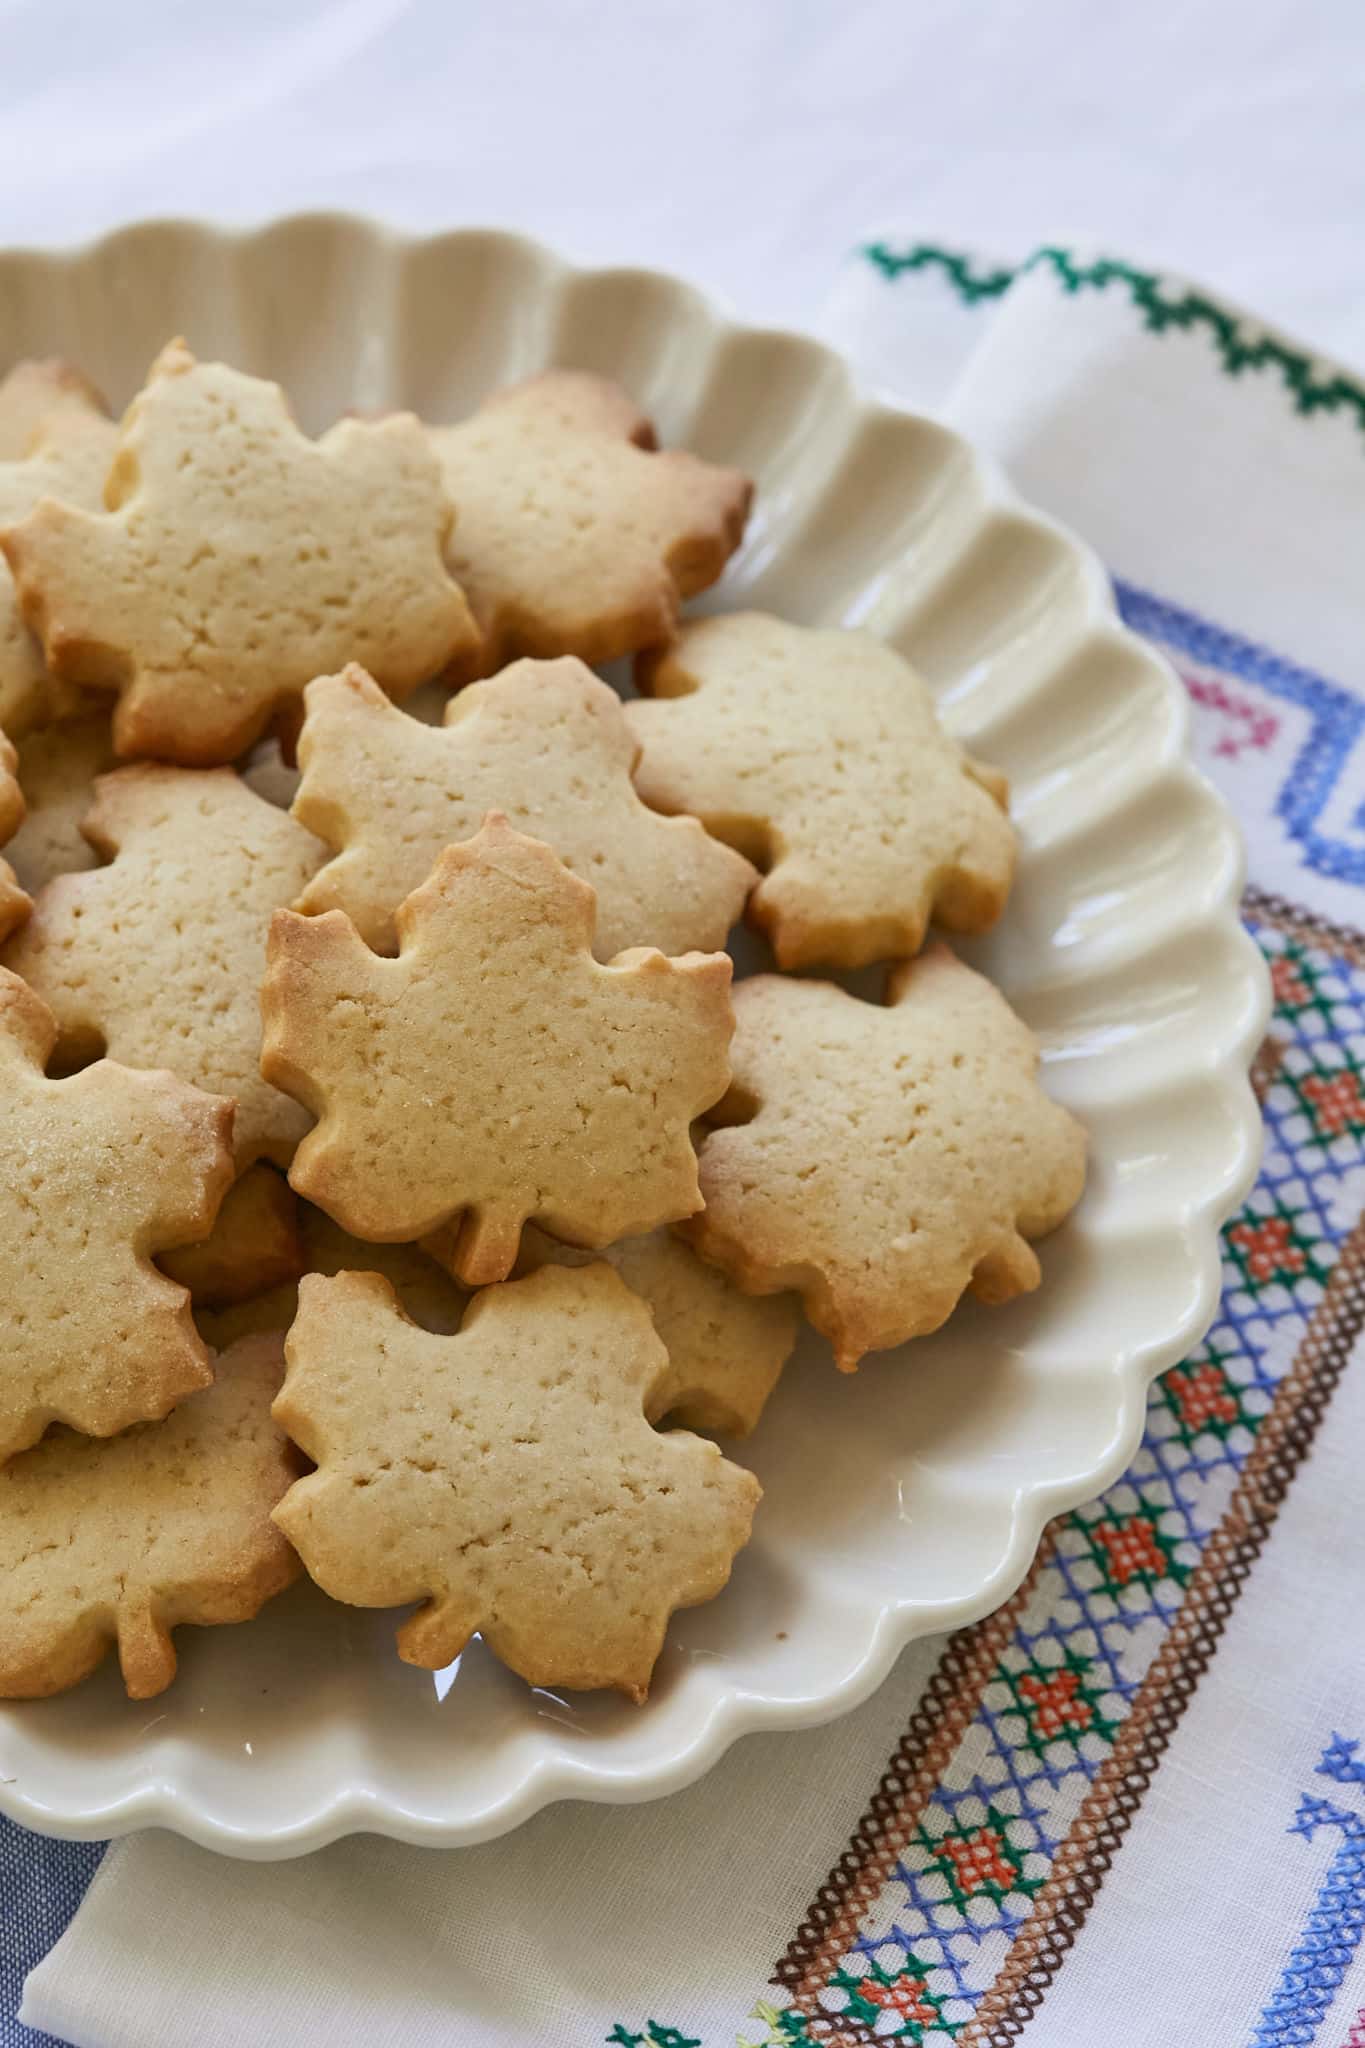 Maple cookies, cut in the shape of a maple leaf, are served on a white scalloped dish.